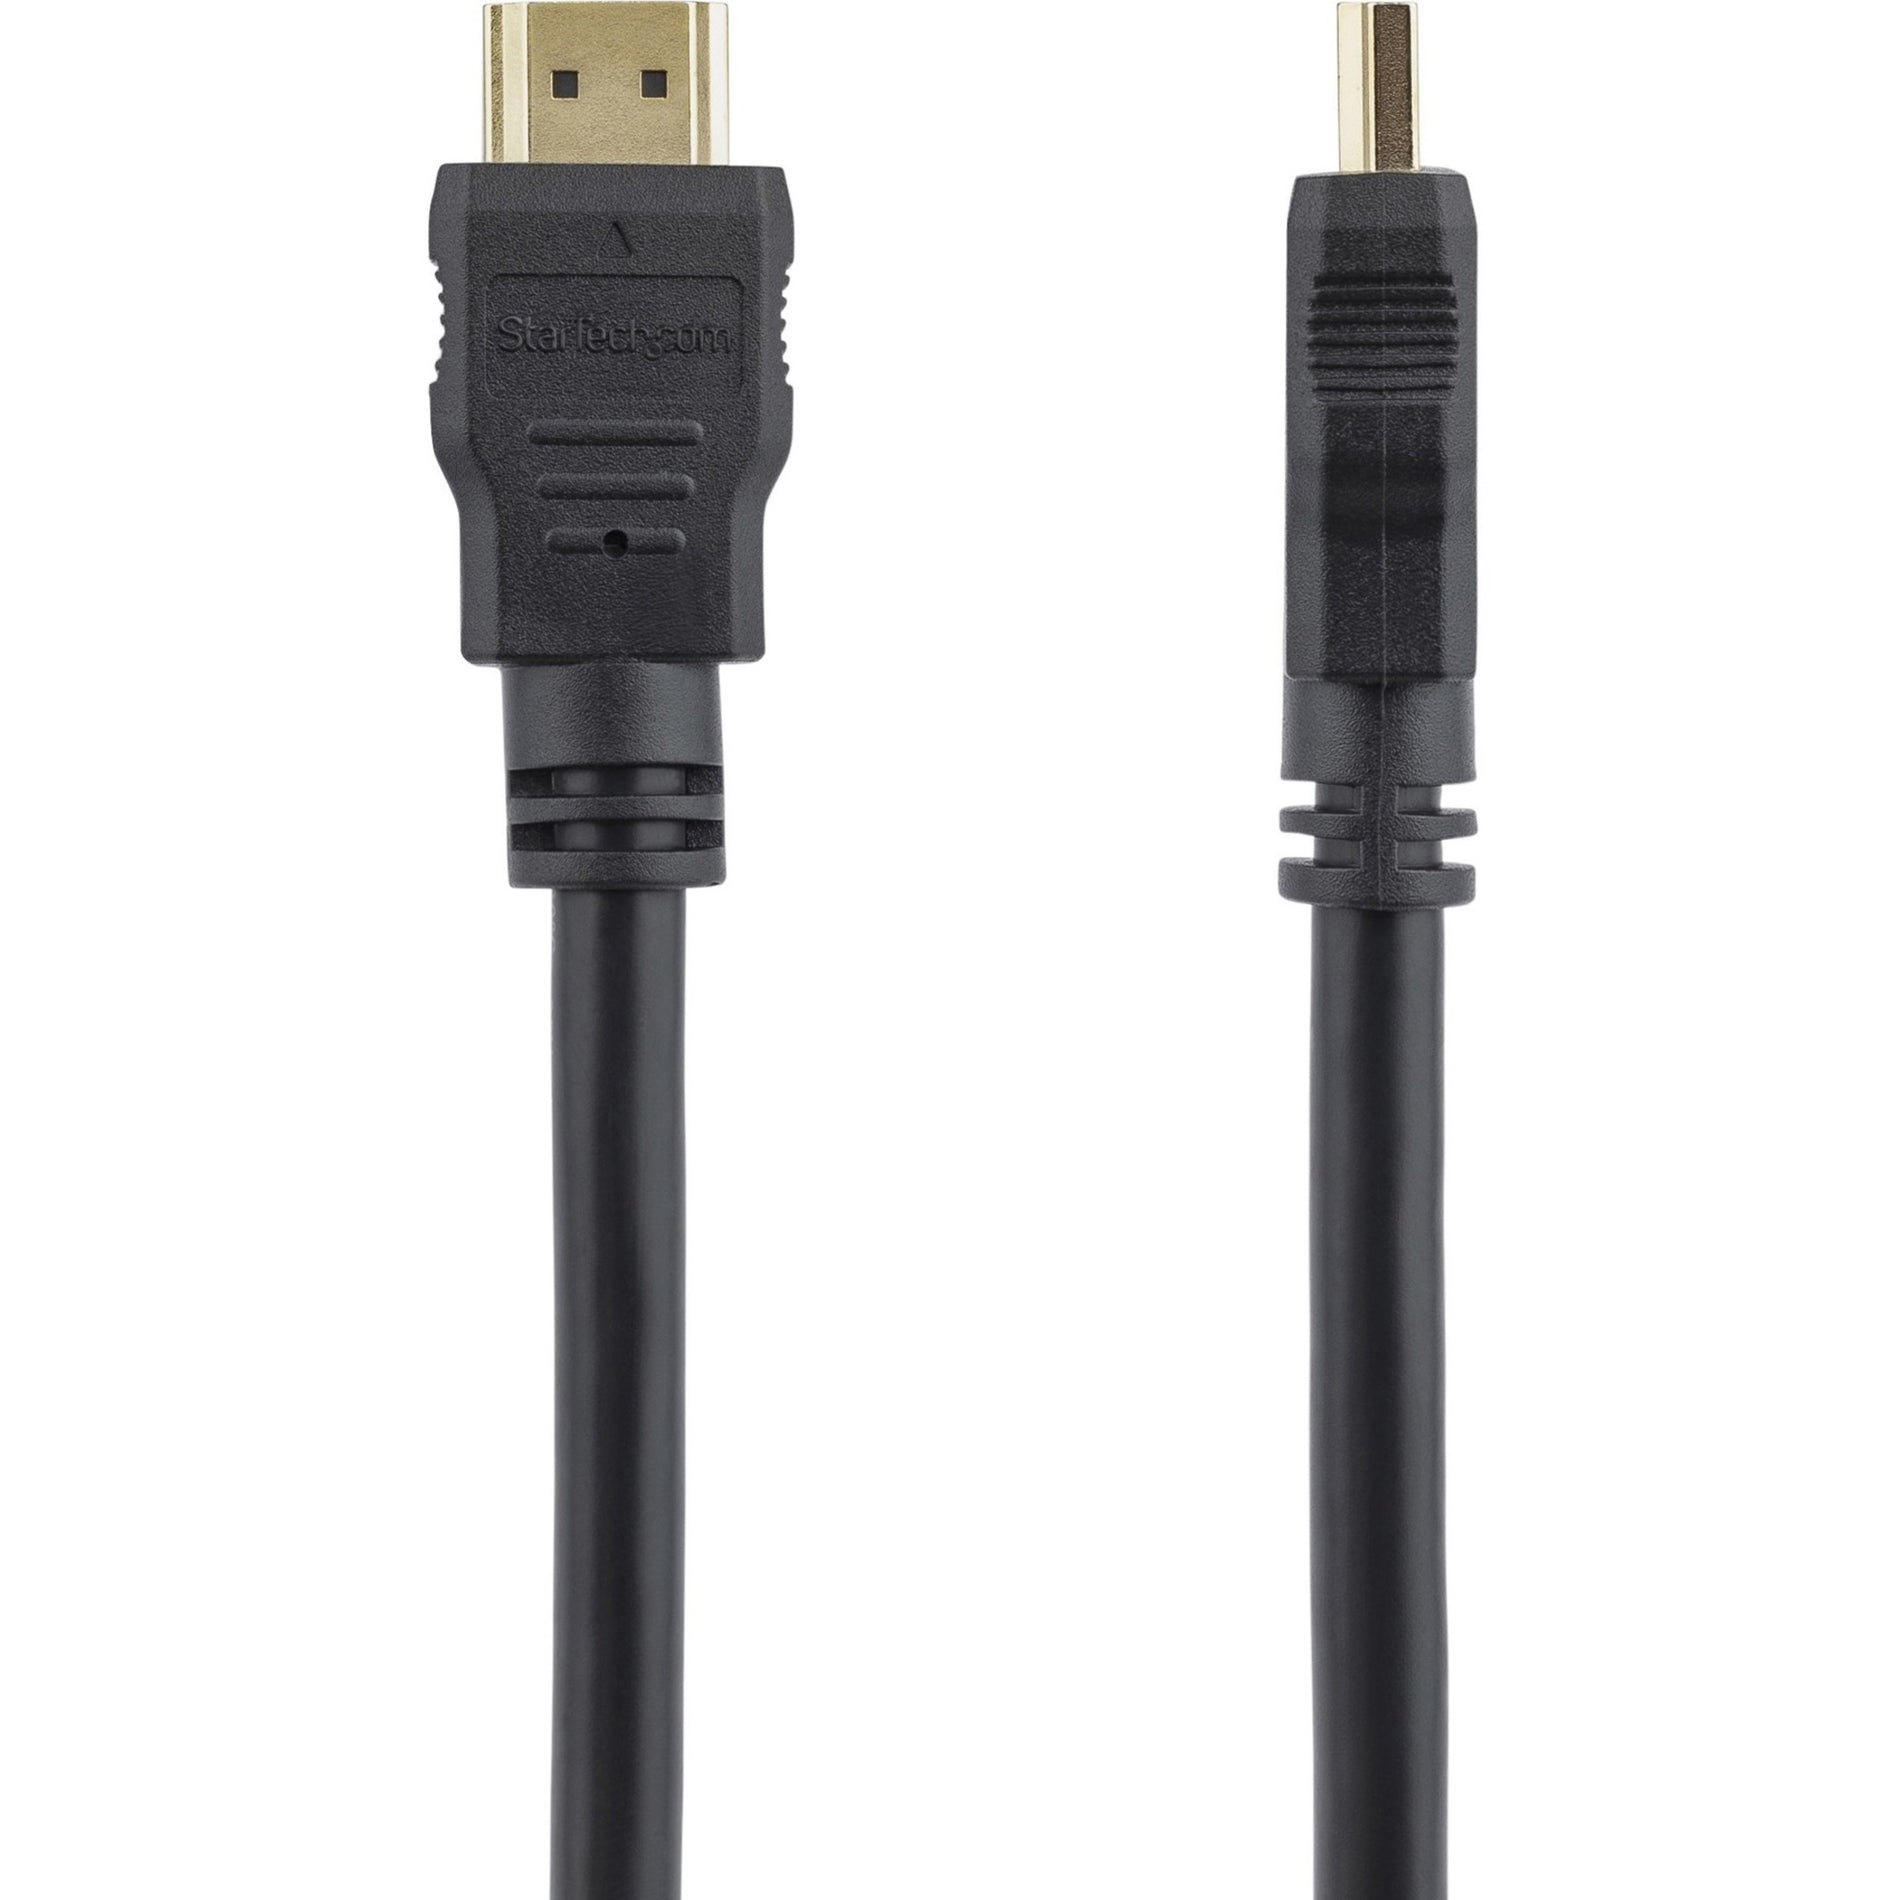 StarTech.com HDMM10 10 ft High Speed HDMI Cable - Ultra HD 4k x 2k HDMI Cable, Gold-Plated Connectors, Black